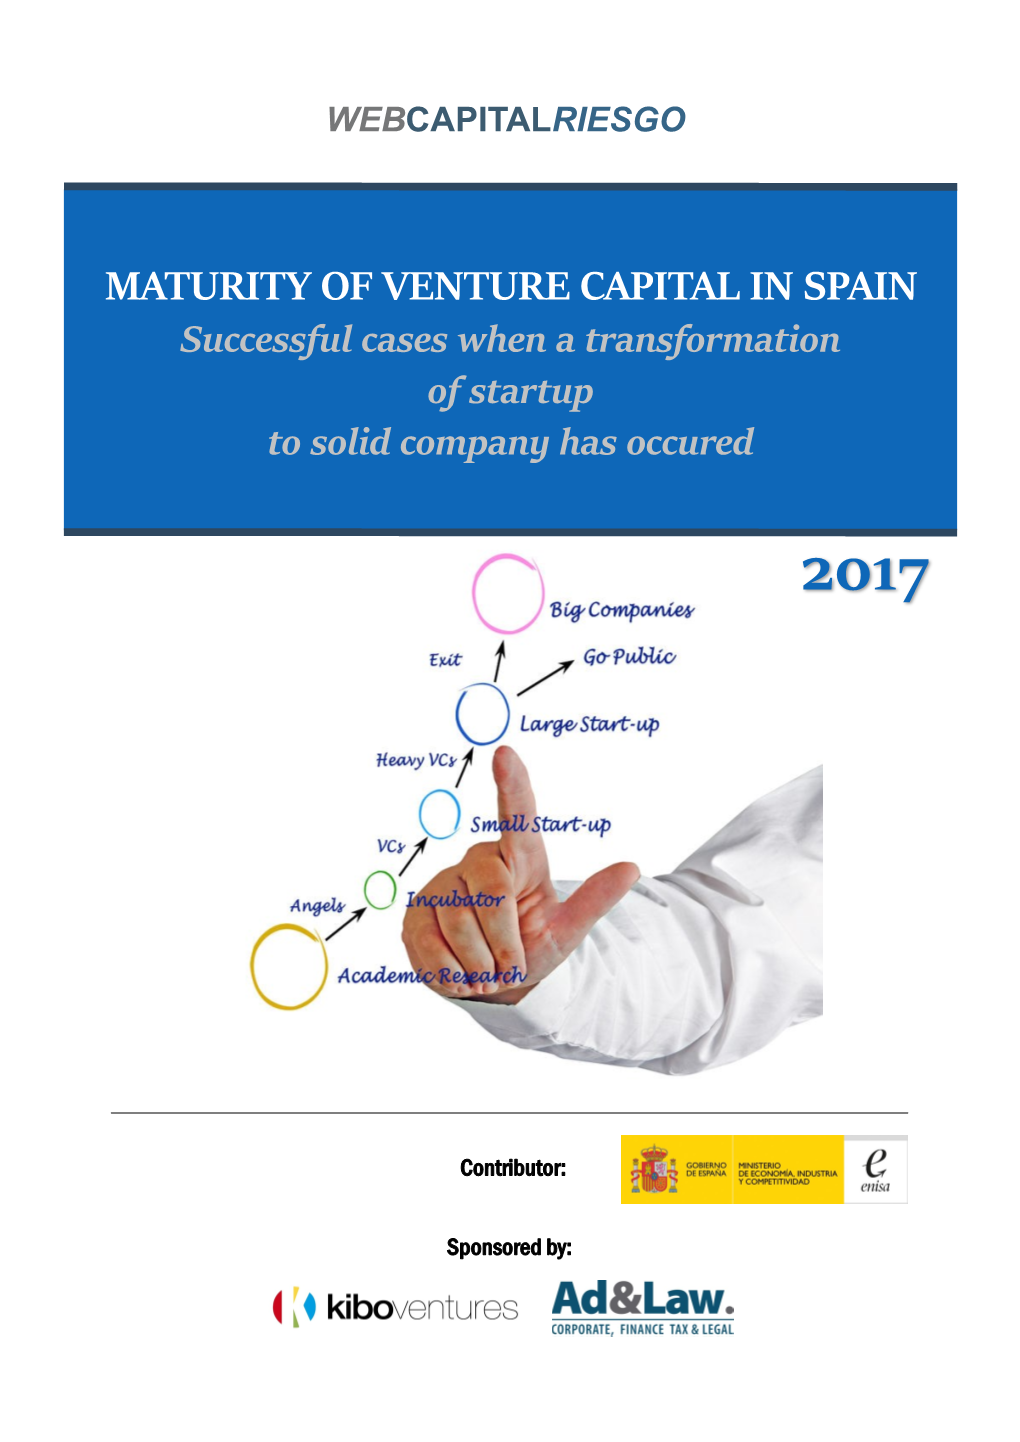 MATURITY of VENTURE CAPITAL in SPAIN Successful Cases When a Transformation of Startup to Solid Company Has Occured